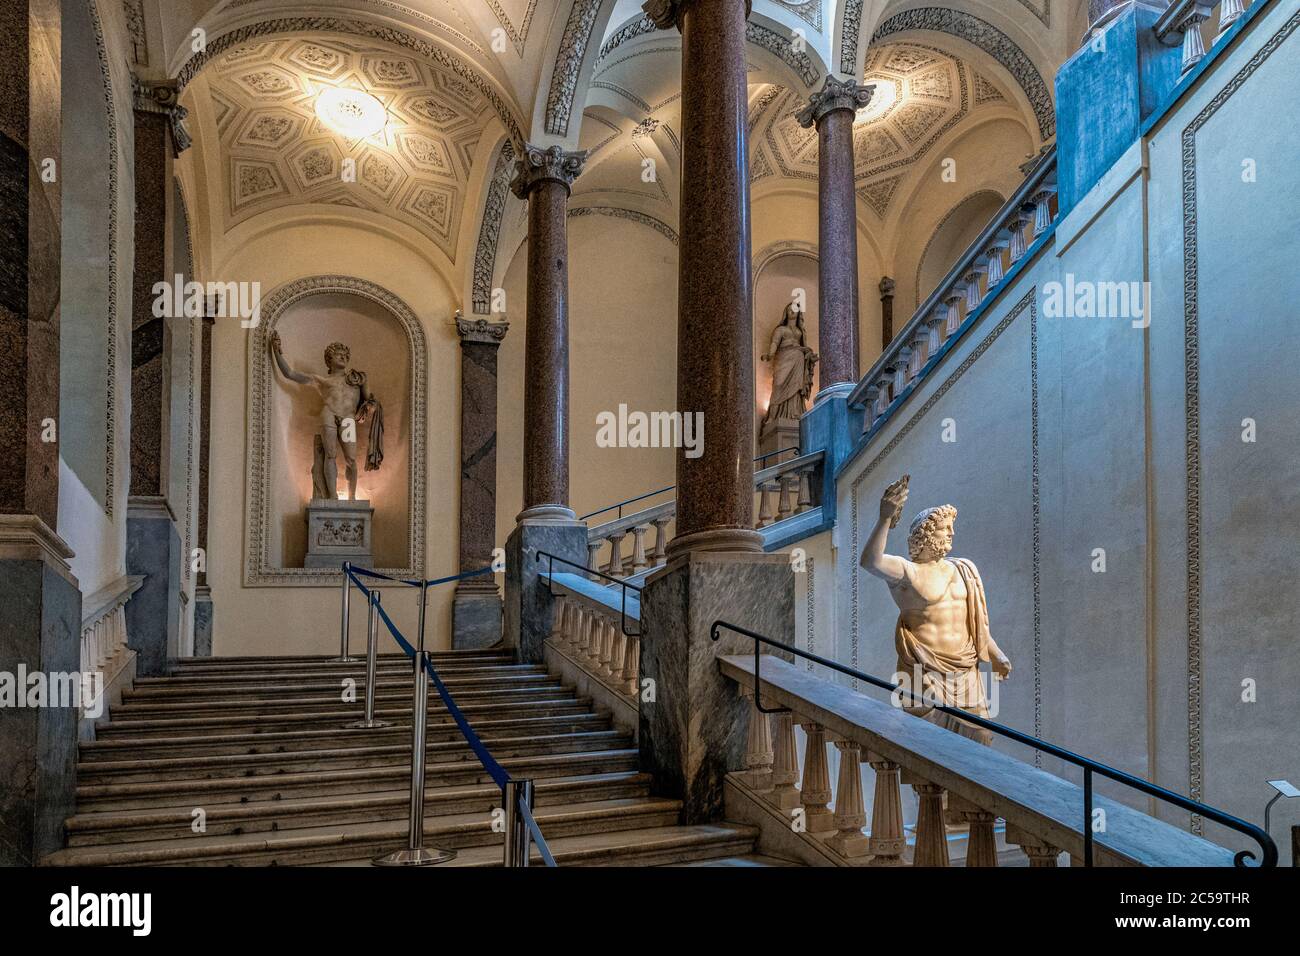 Italy Lazio - Palazzo Braschi in Rome: the elegant monumental staircase probably by Valadier, adorned with ancient statues and stuccos Stock Photo